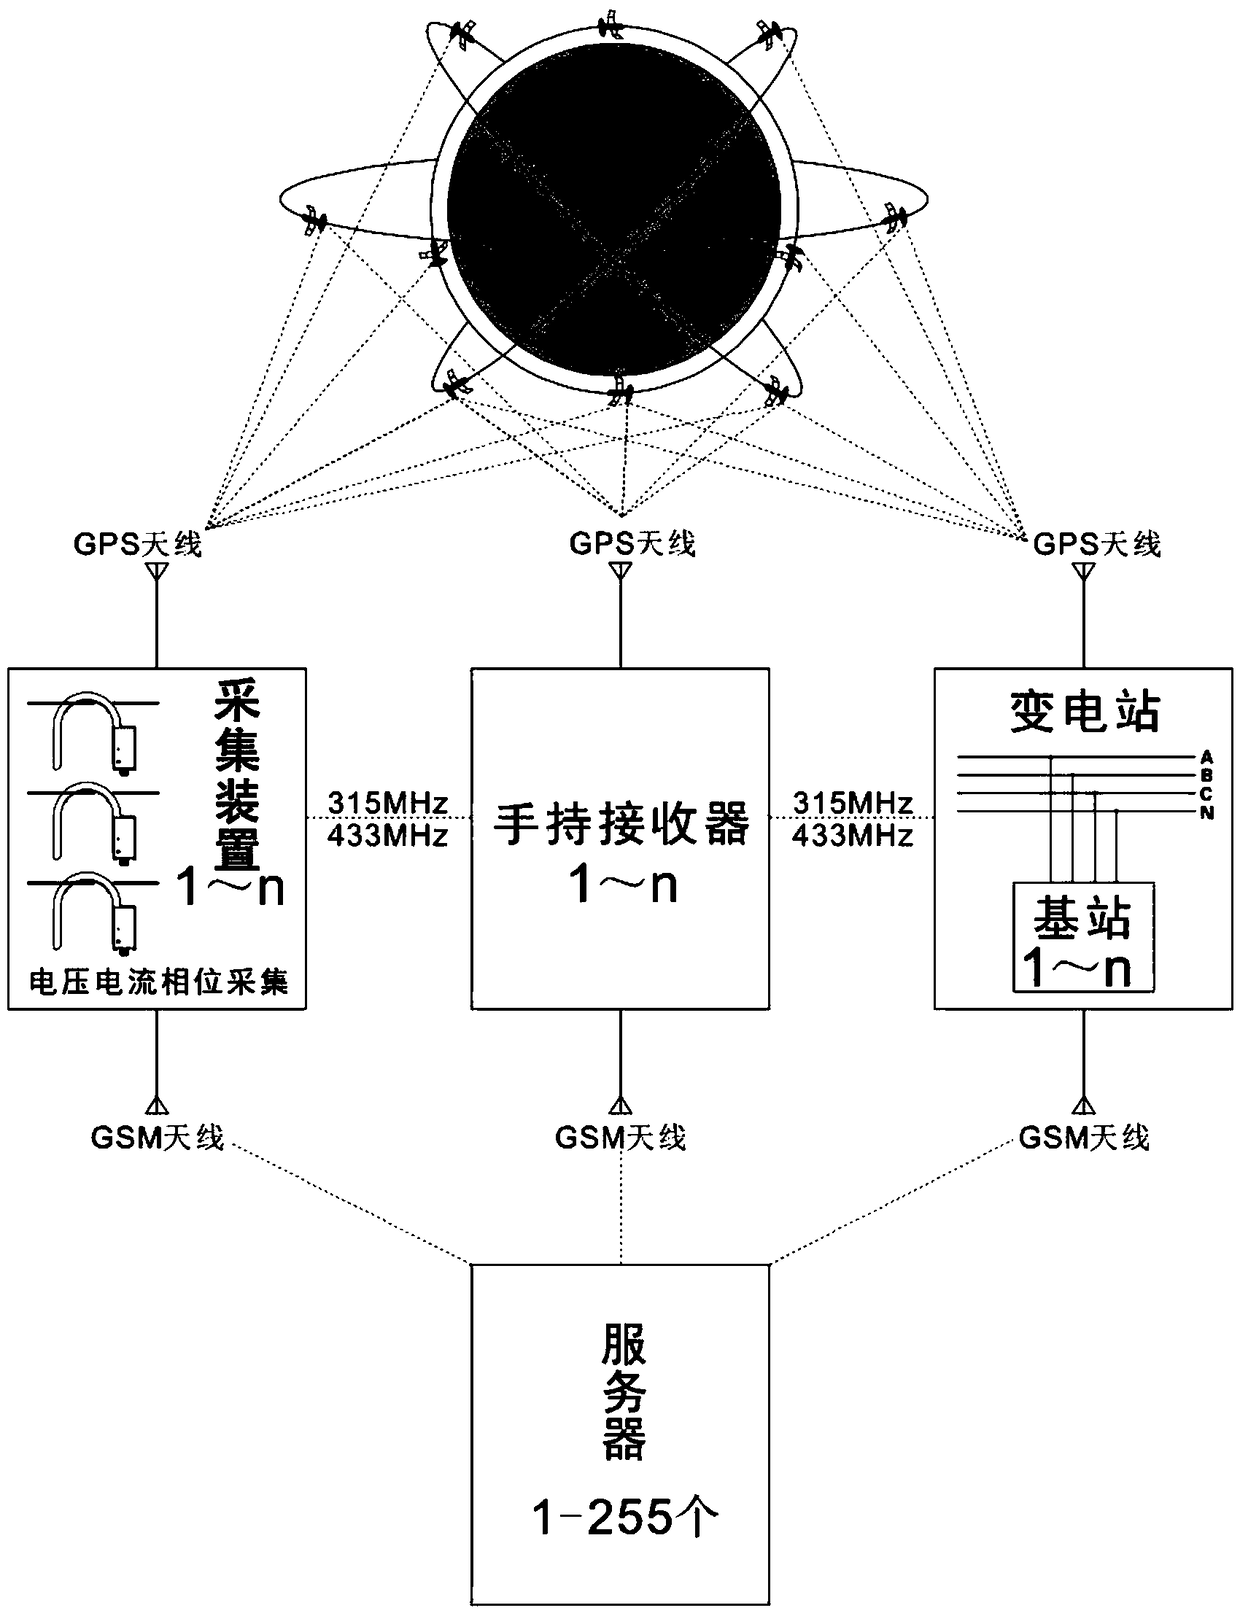 Remote network base station phase determination and phase verification & current and voltage acquisition device and system